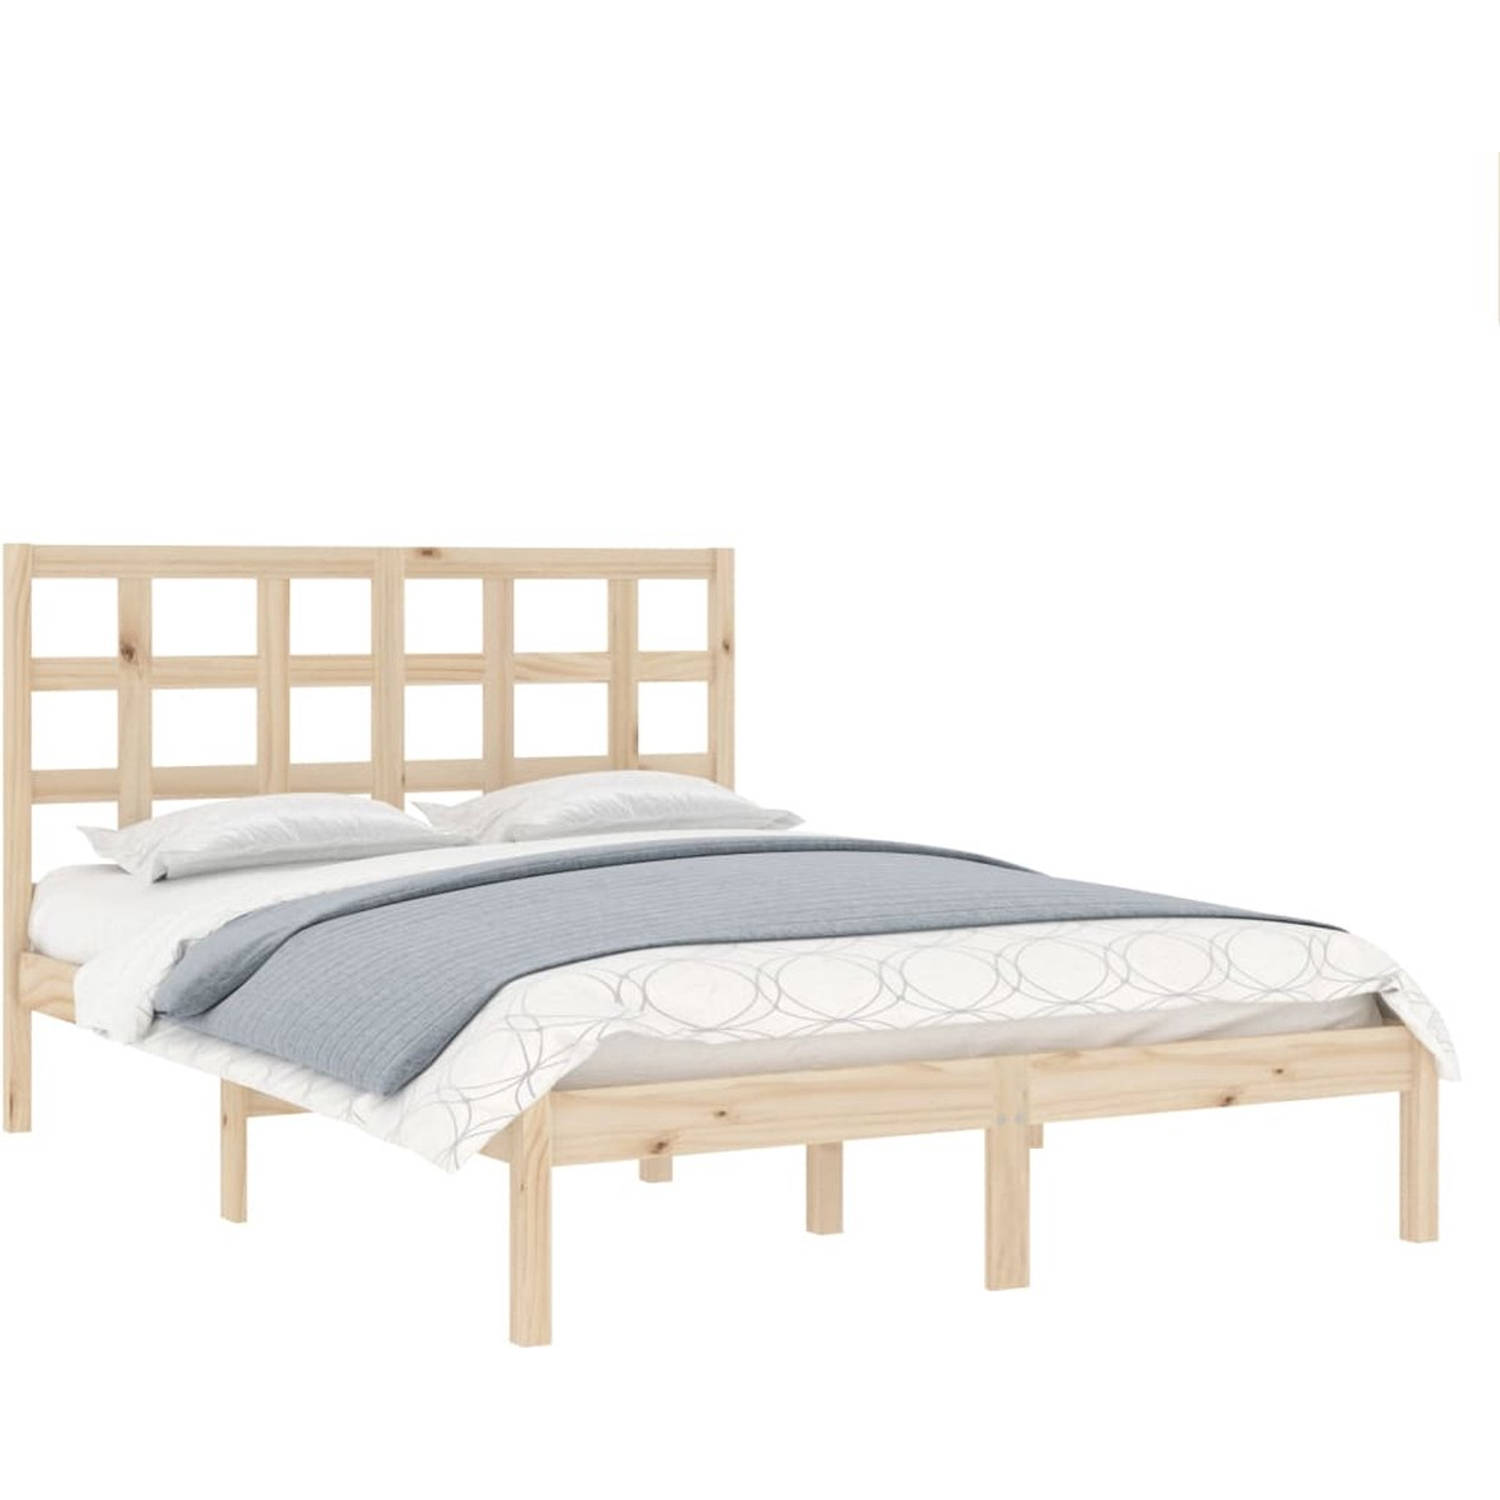 The Living Store Bedframe Grenenhout - Massief - 140 x 200 cm